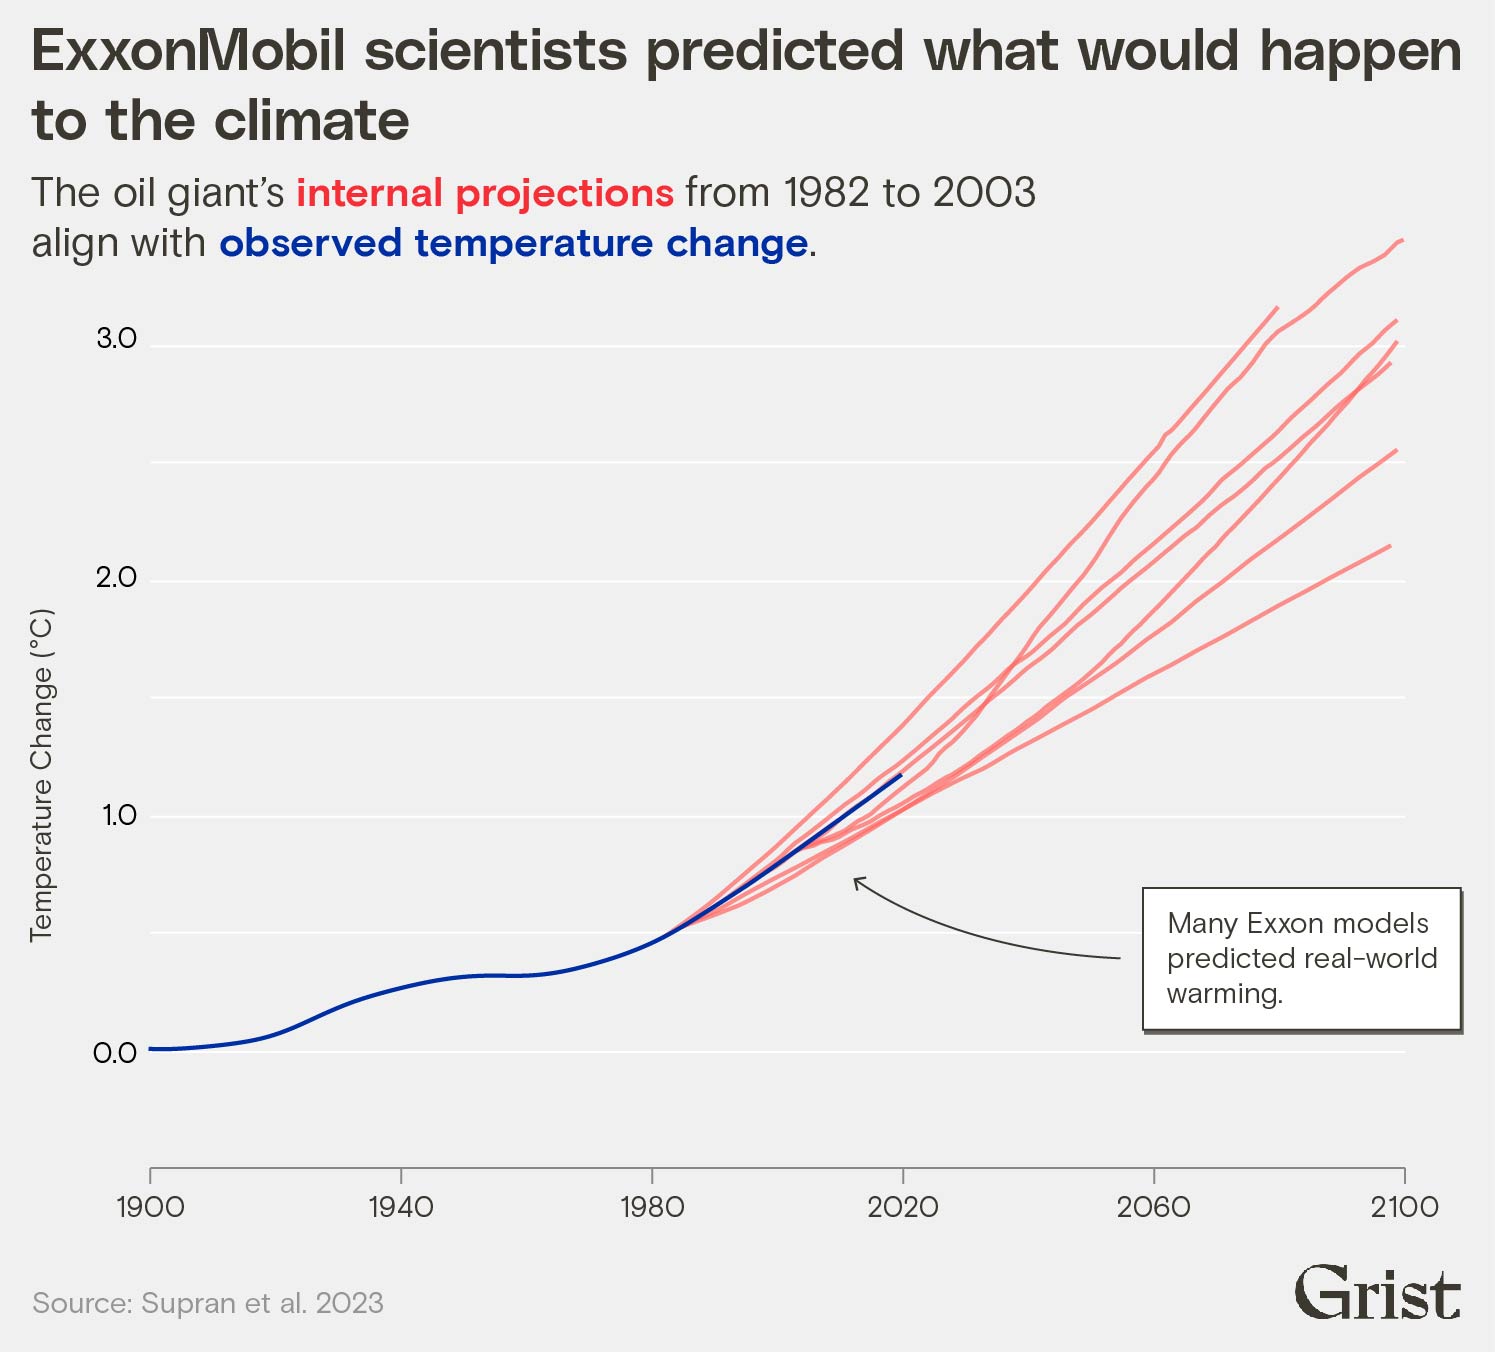 Multi-line chart shows alignment between observed temperature change and future temperature change modeled by ExxonMobil scientists.